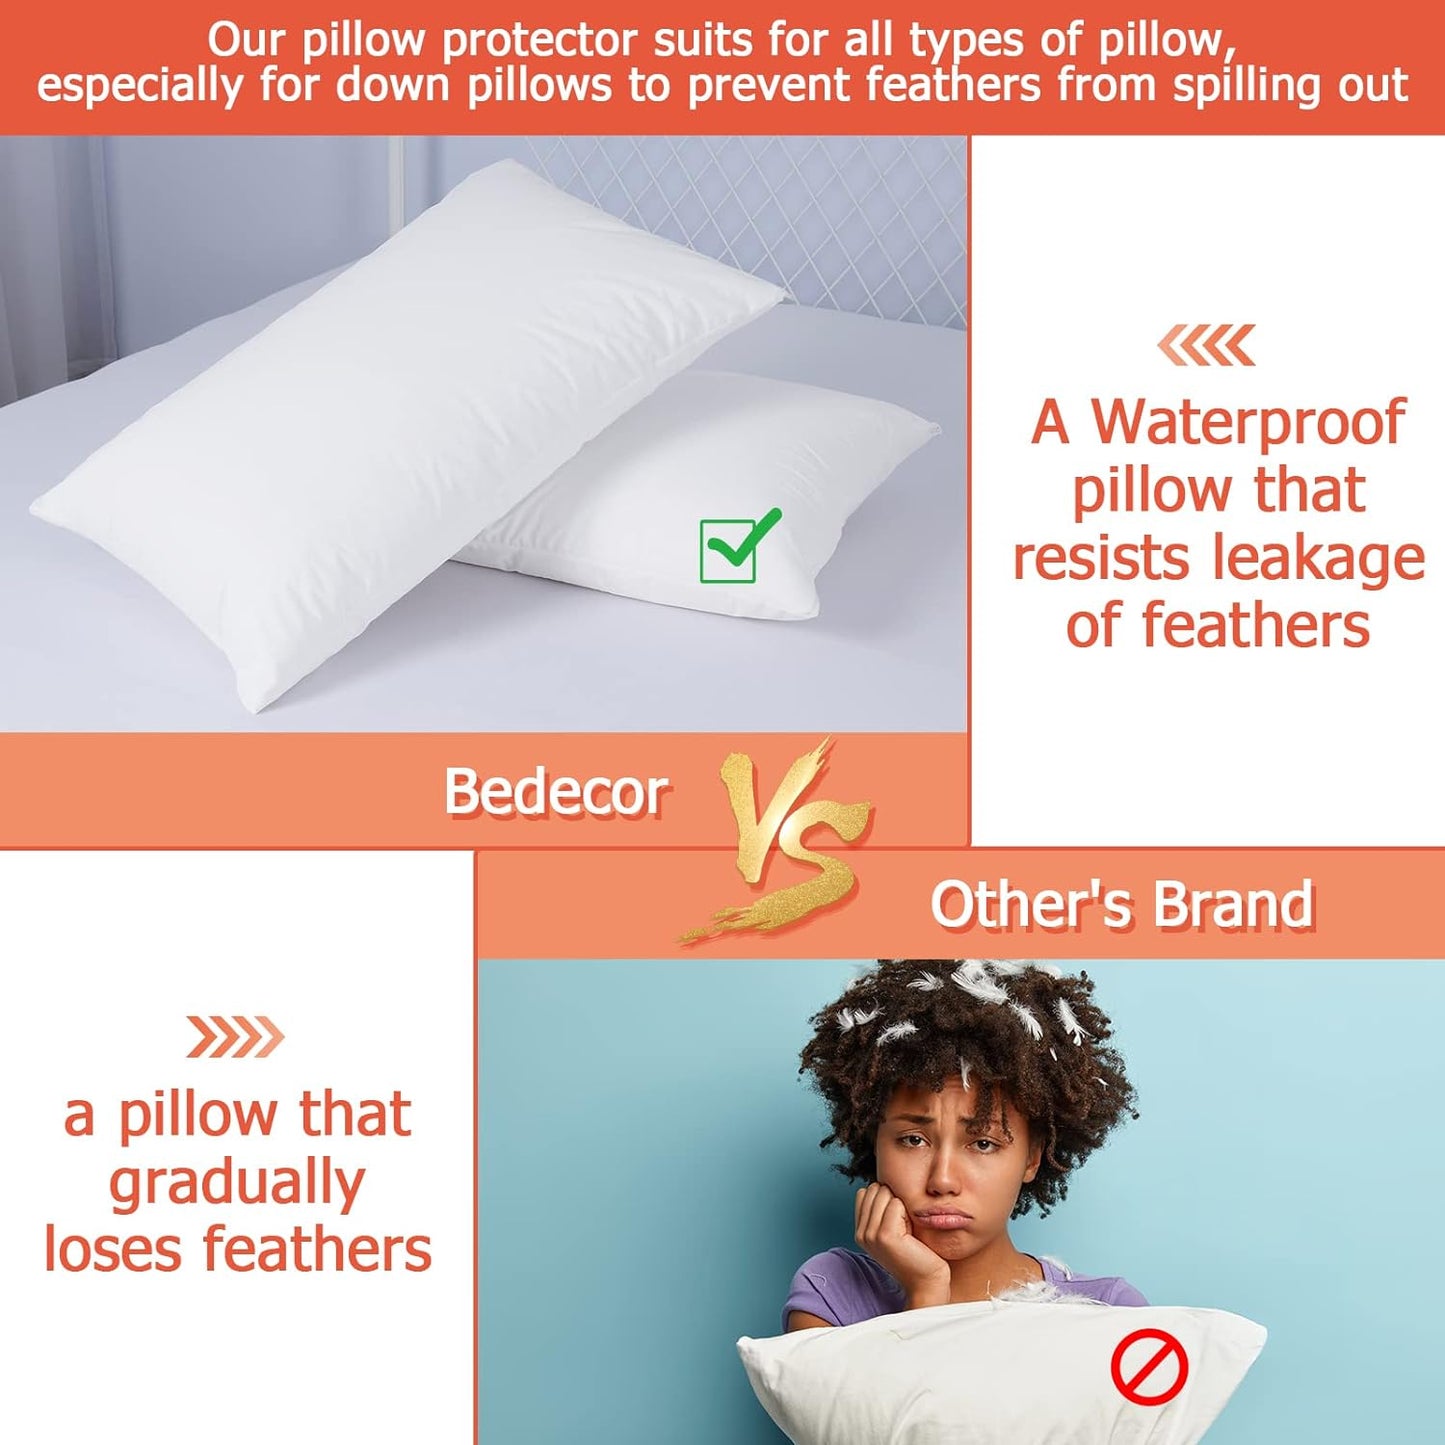 Bedecor Standard Pillow Protector with Zipper 2 Pack ,Waterproof Pillow Covers Encasement Smooth Dust Proof with Breathable Holes Allow Air to Circulate